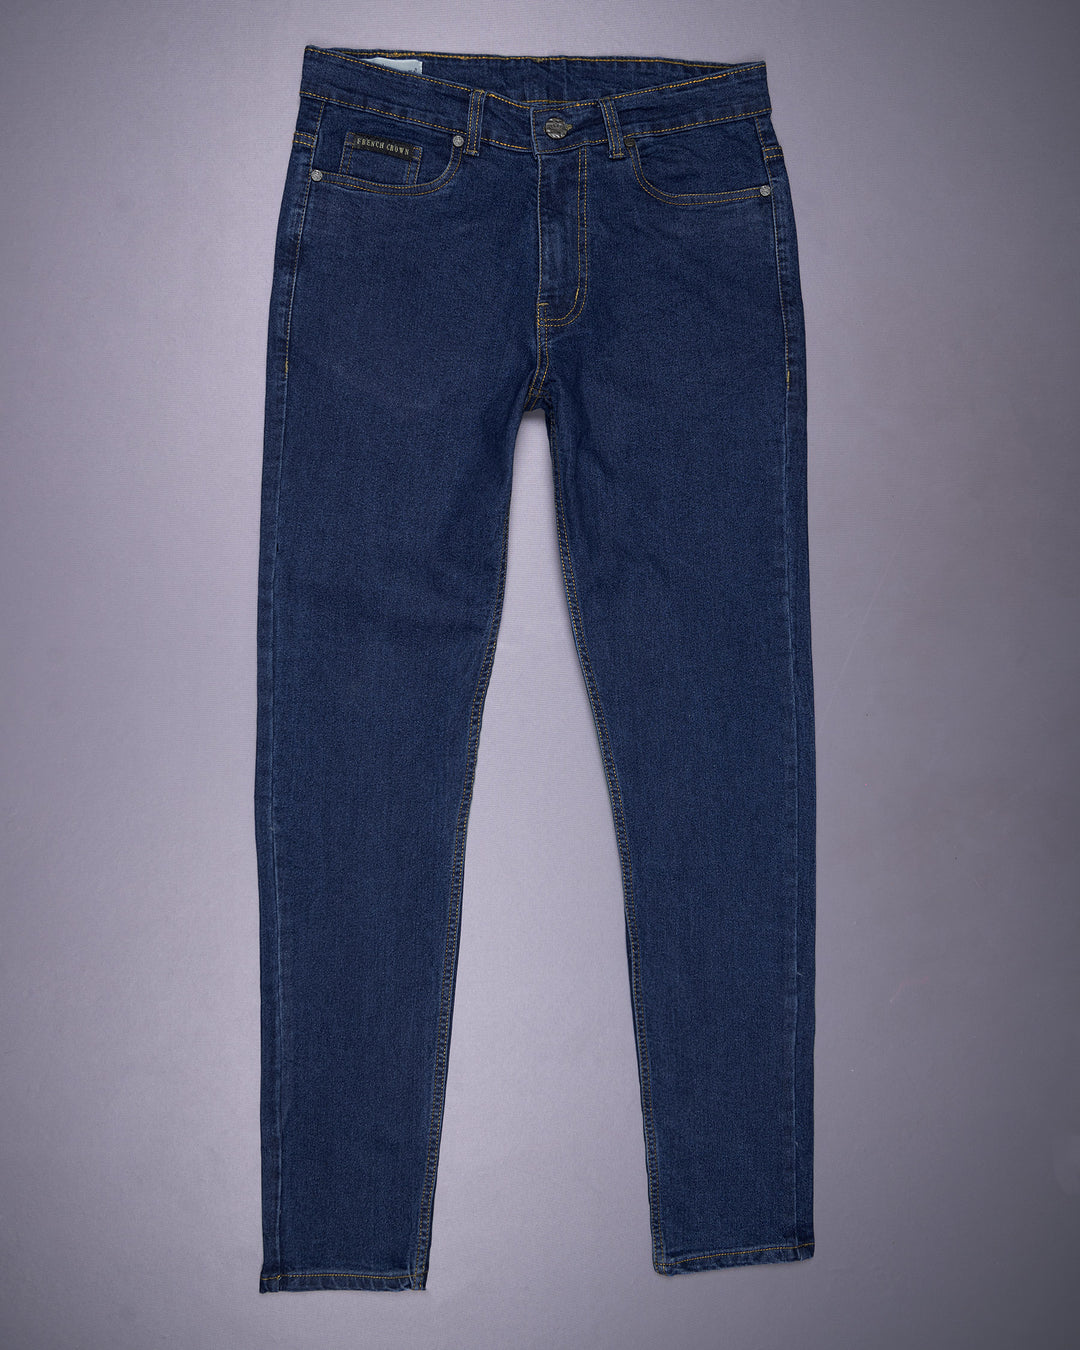 BLUE WHALE SLIM FIT MID-RISE CLEAN LOOK STRETCHABLE DENIM